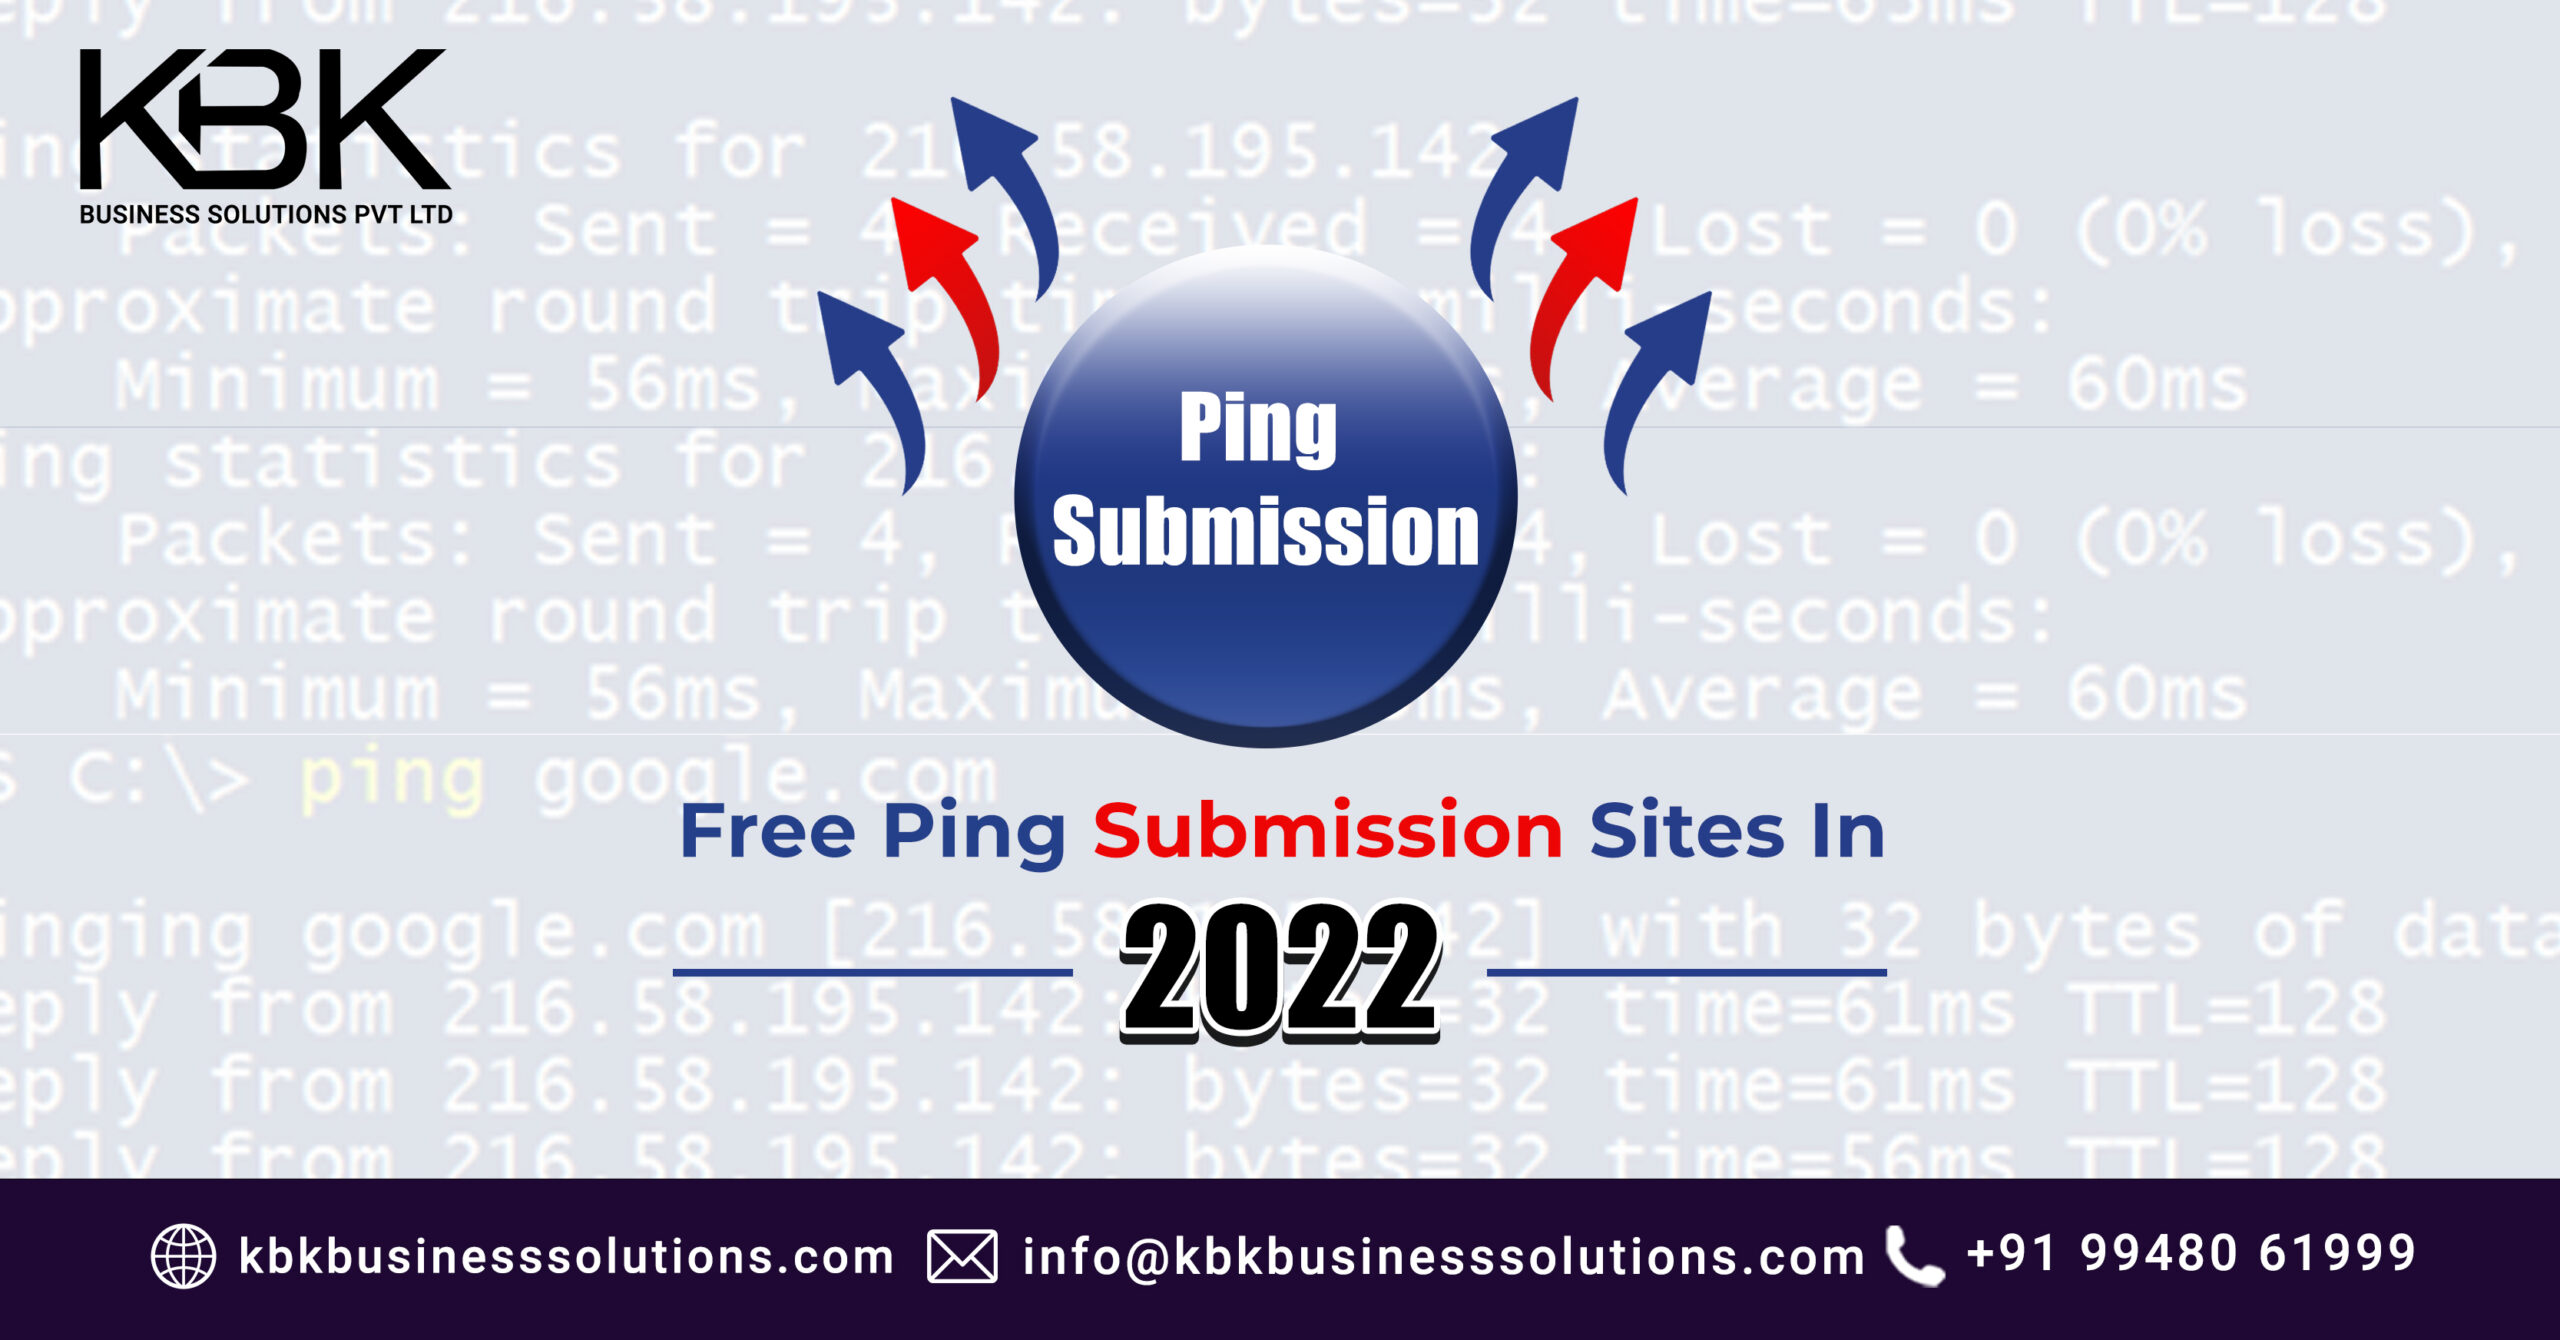 Ping submissions sites